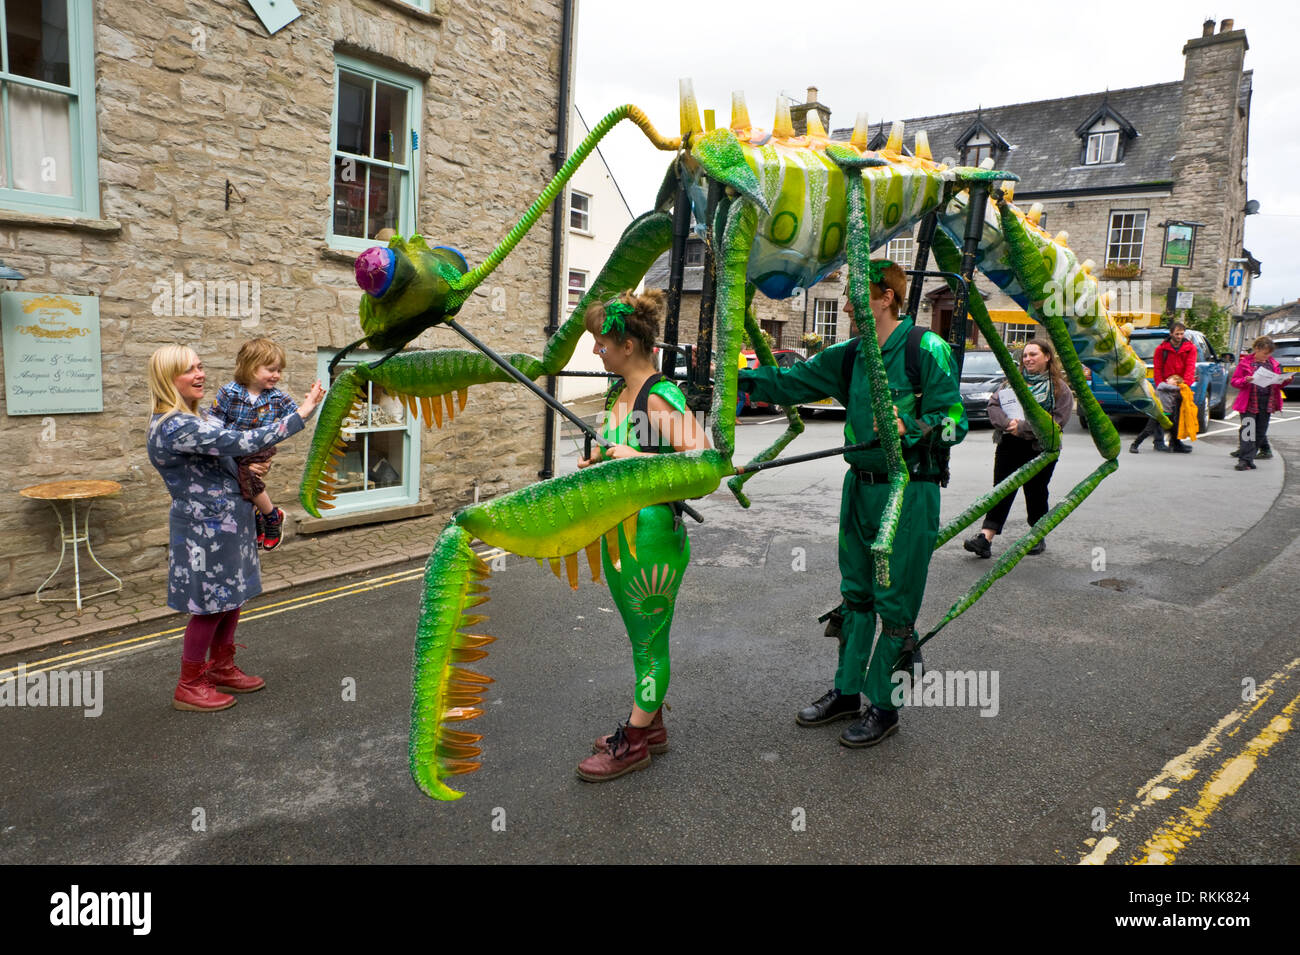 Large green praying mantis an automaton part of an art project being paraded around the town centre of Hay on Wye Powys Wales UK Stock Photo